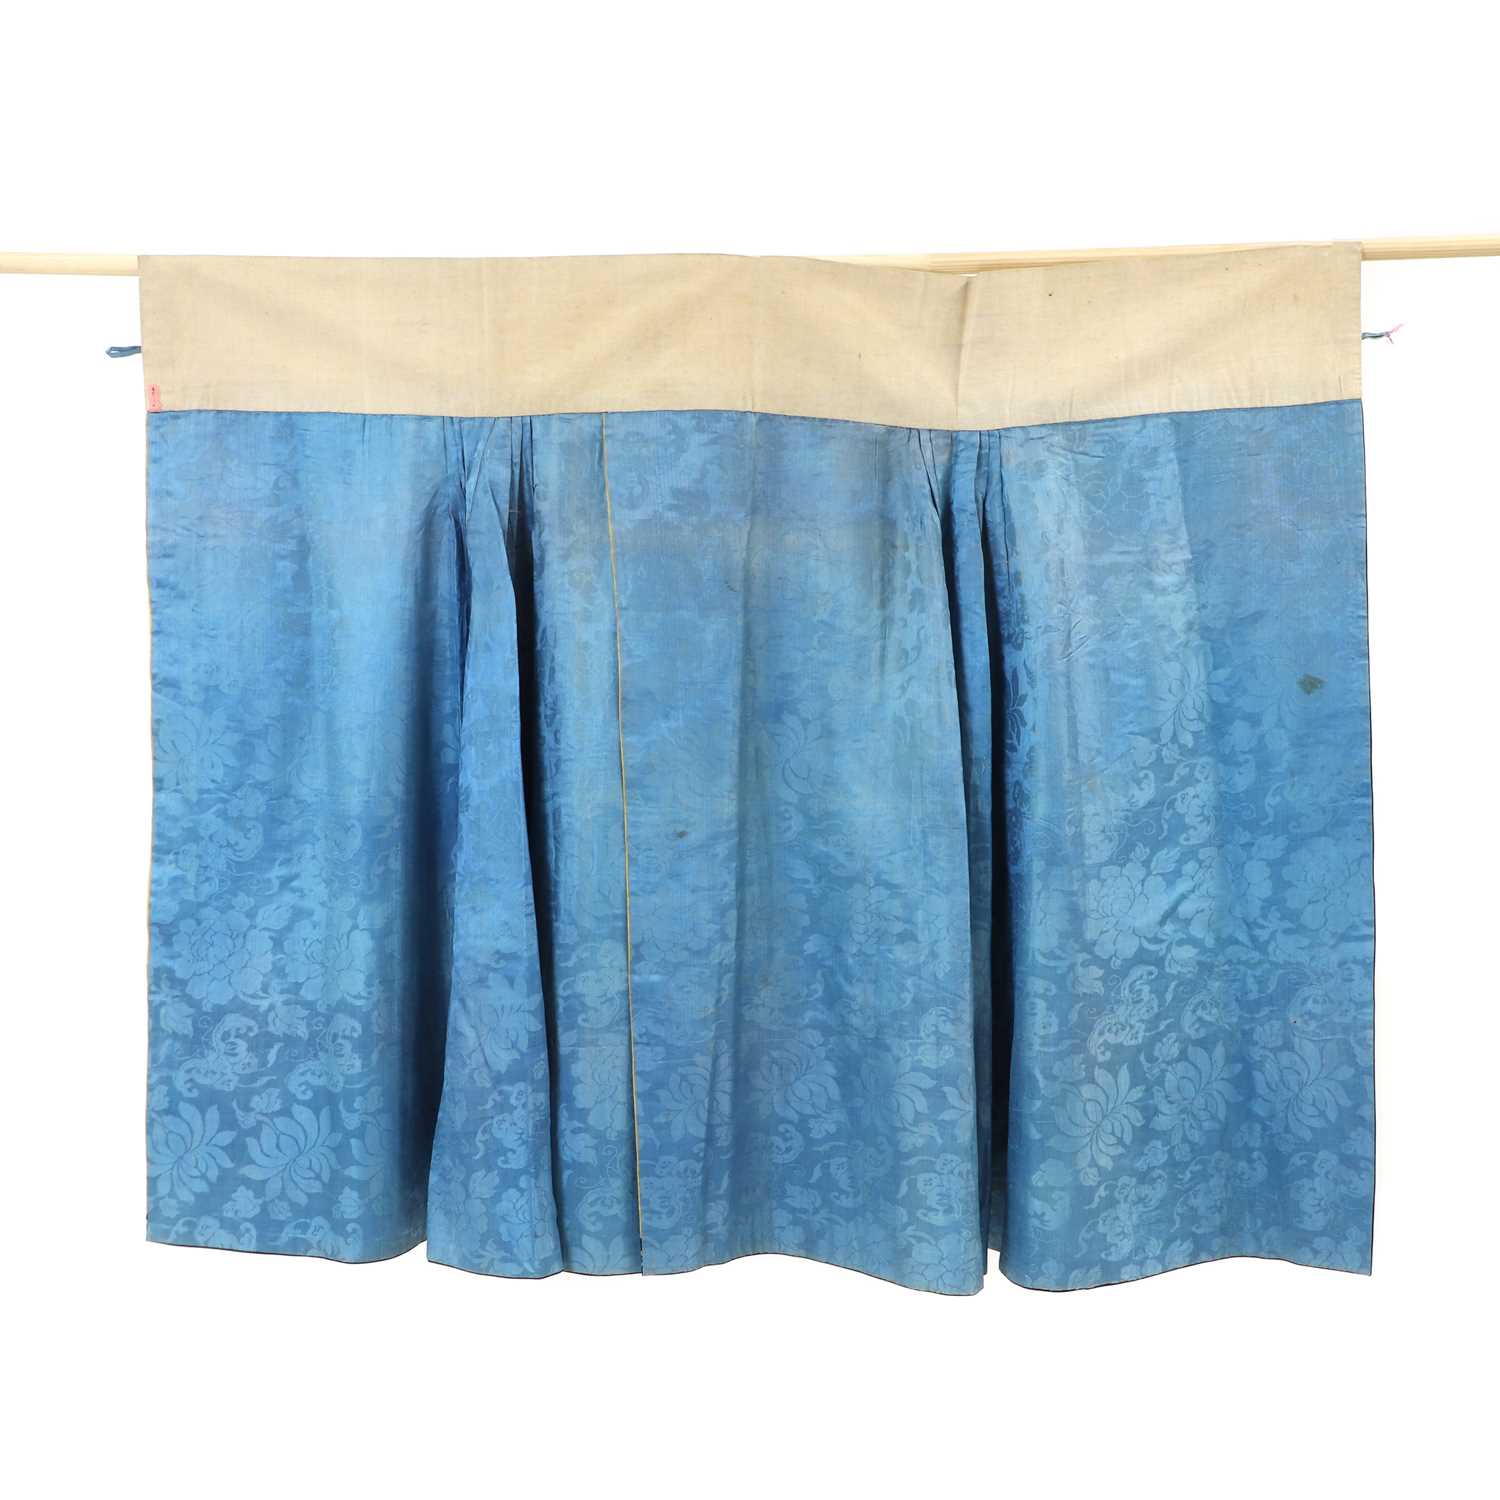 A Chinese embroidered skirt, - Image 2 of 5